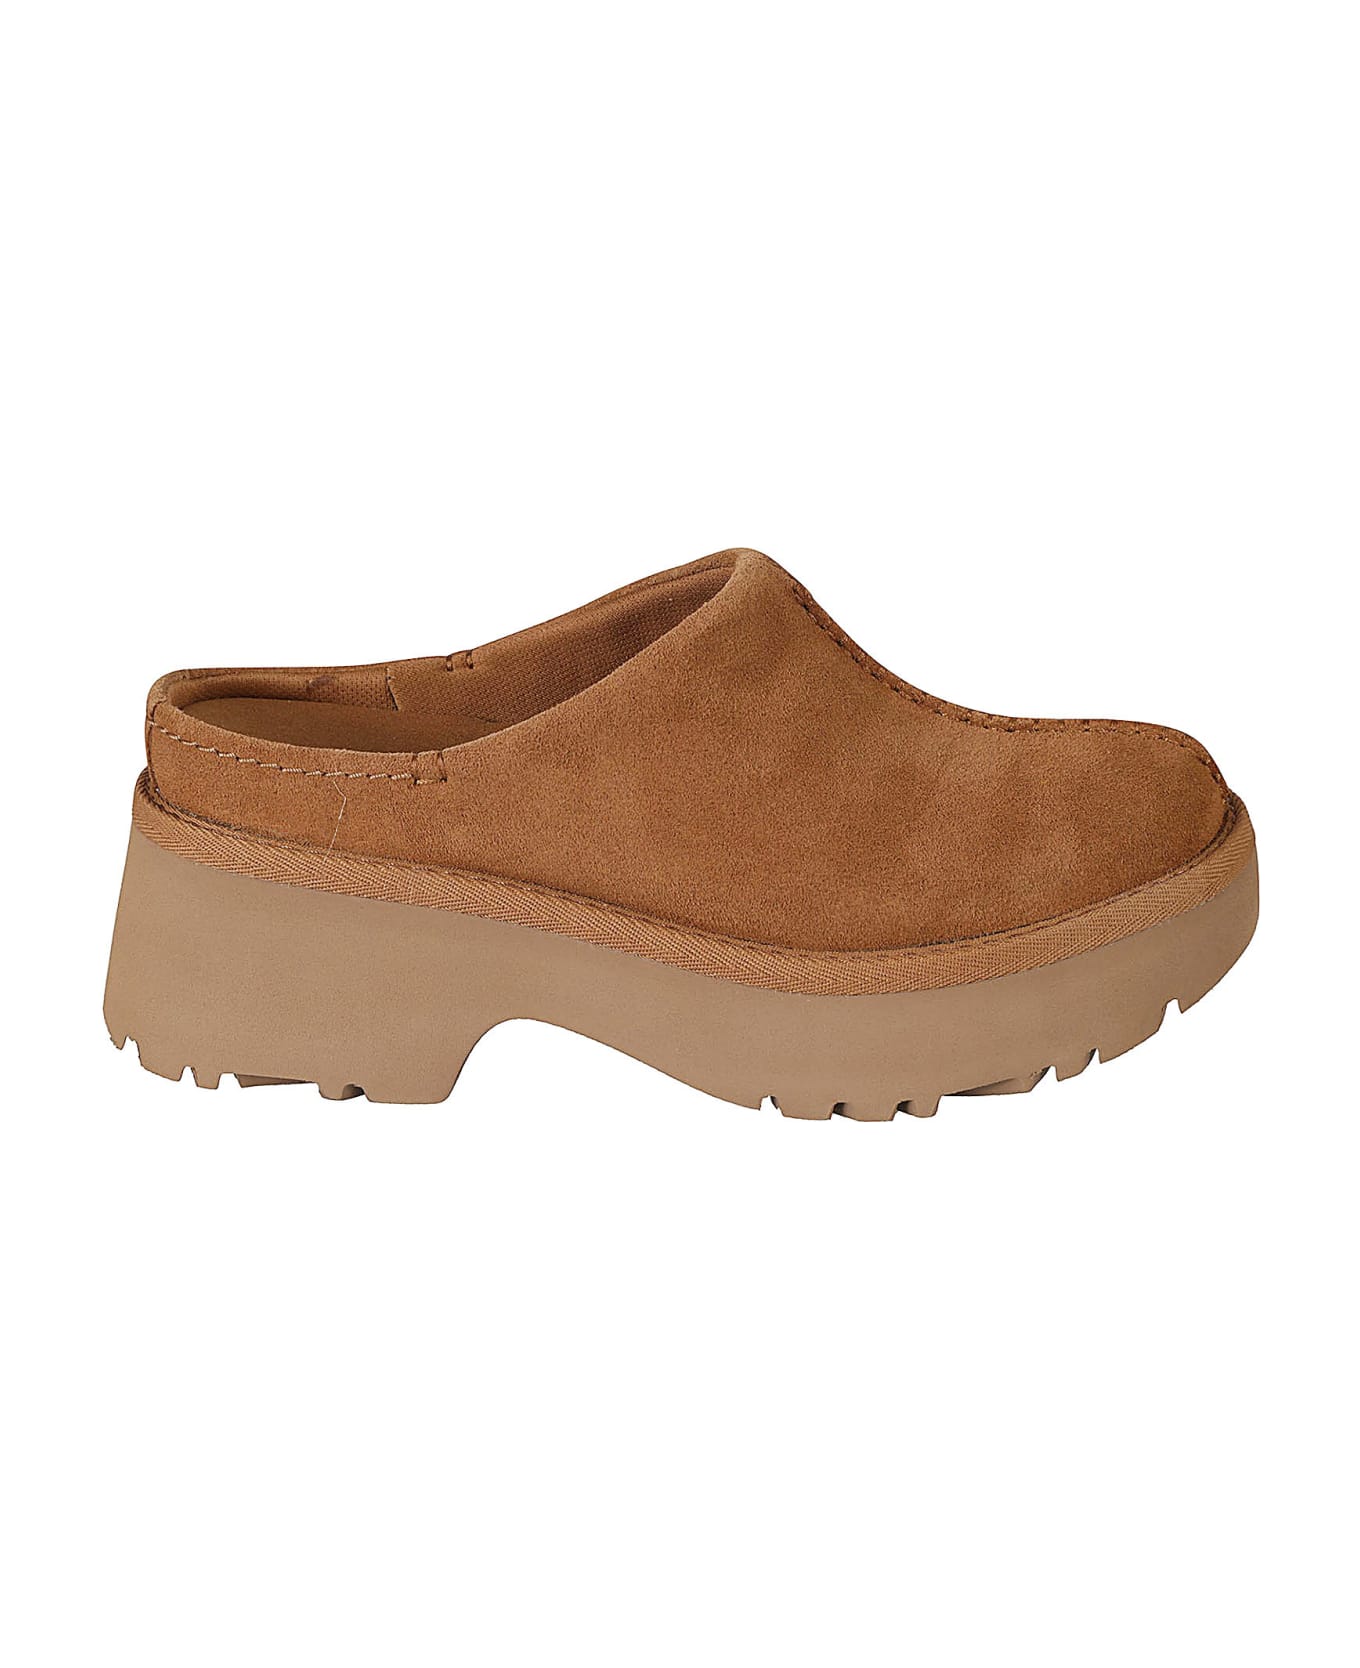 UGG New Heights Clogs - CHESTNUT